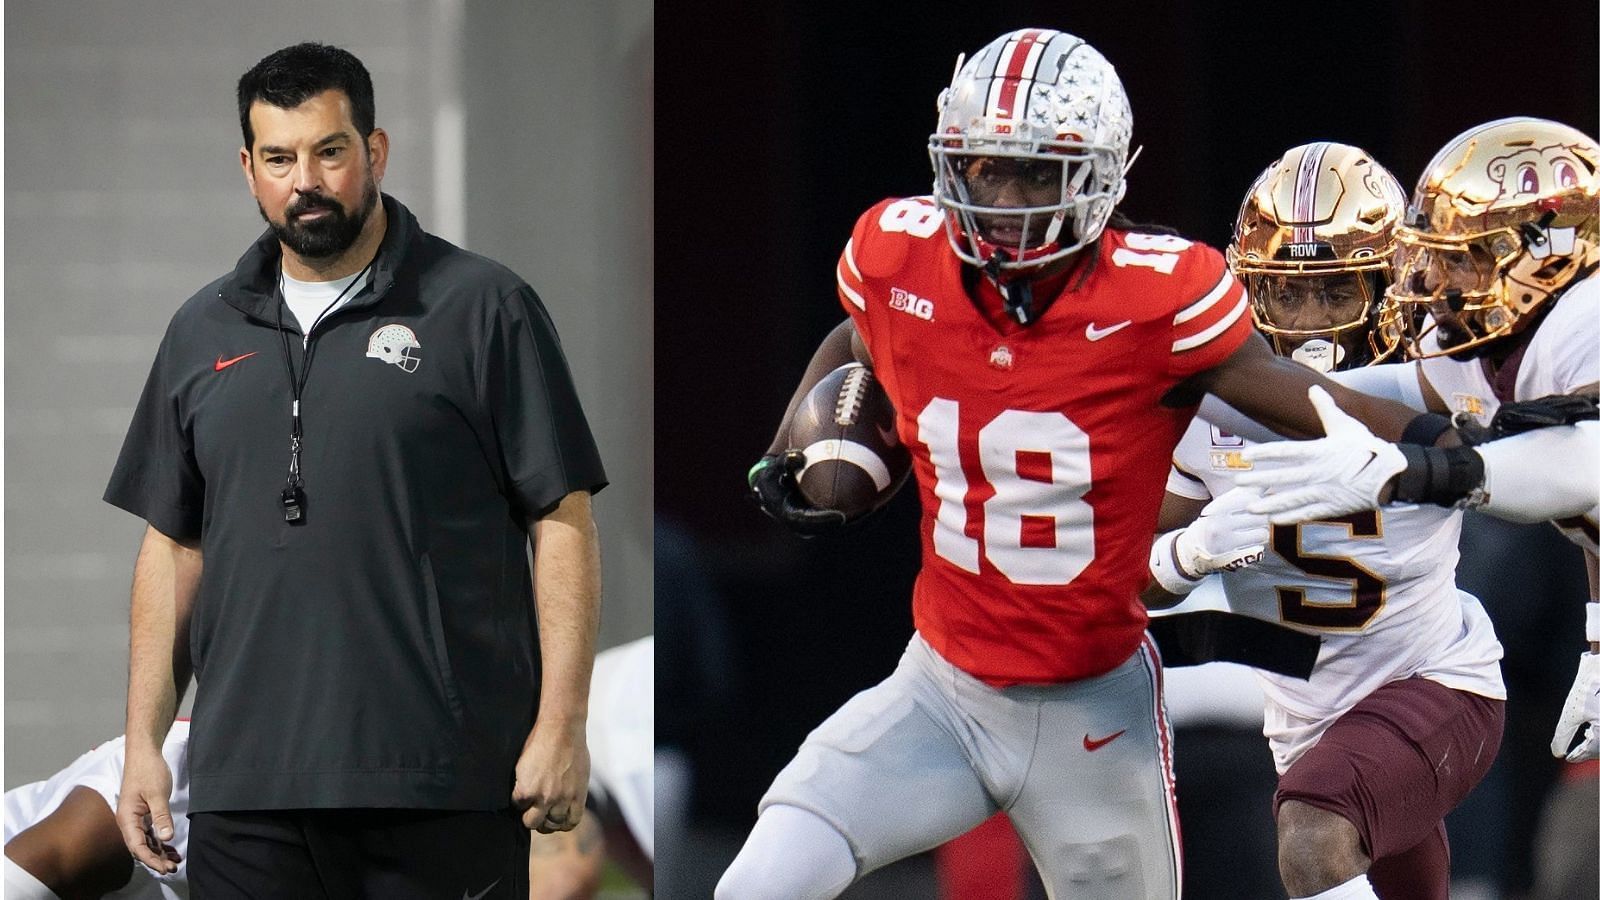 Coach Ryan Day and the Buckeyes are sending another round of players to the NFL, including top prospect Marvin Harrison Jr.